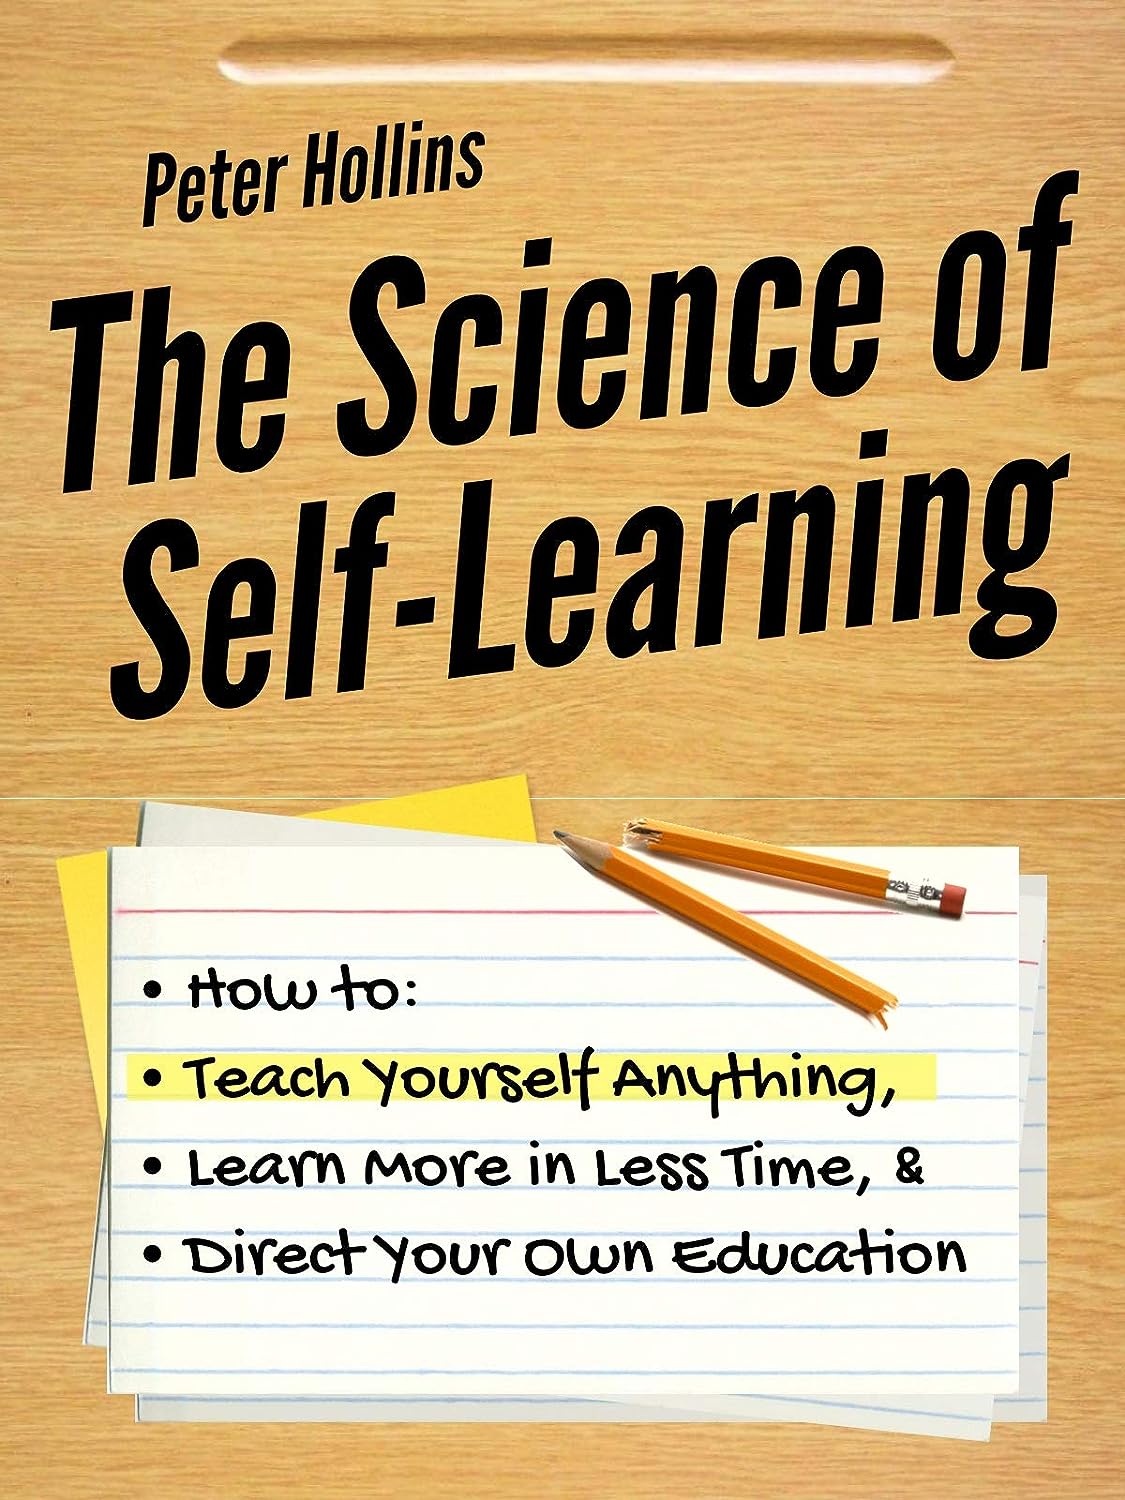 Book Cover: Thr Science of Self Learning